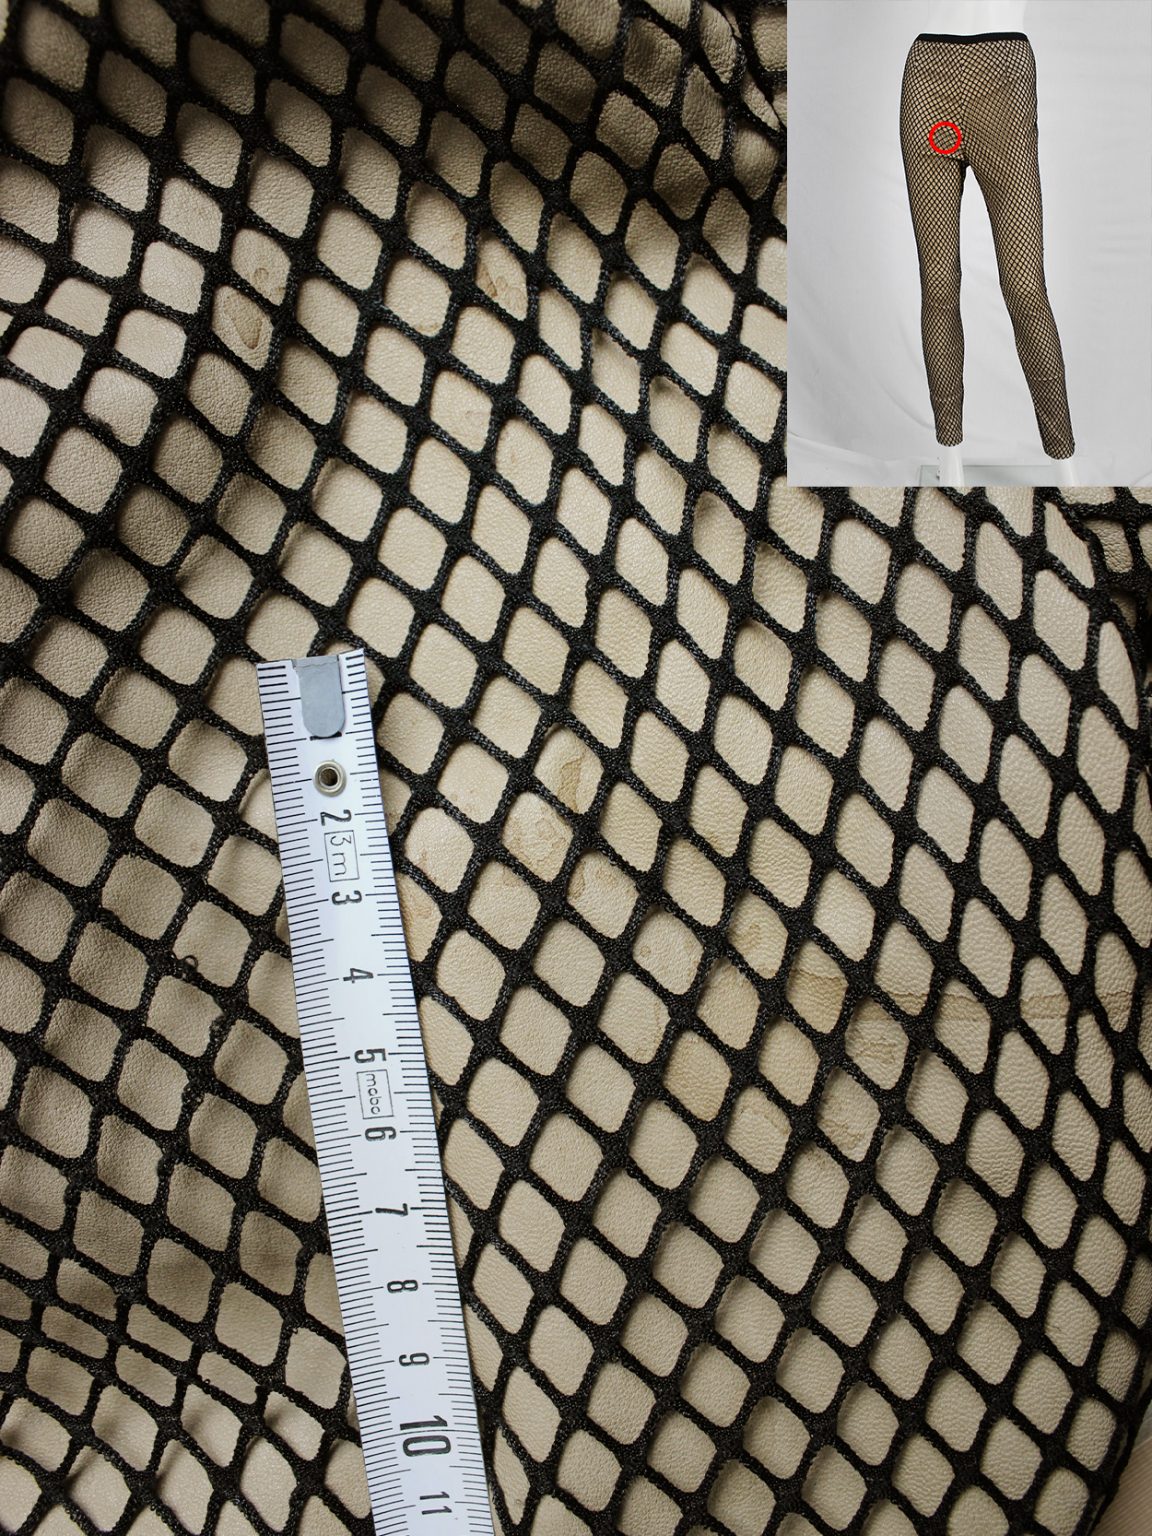 Maison Martin Margiela nude leather trousers with black fishnet overlayer — fall 2011